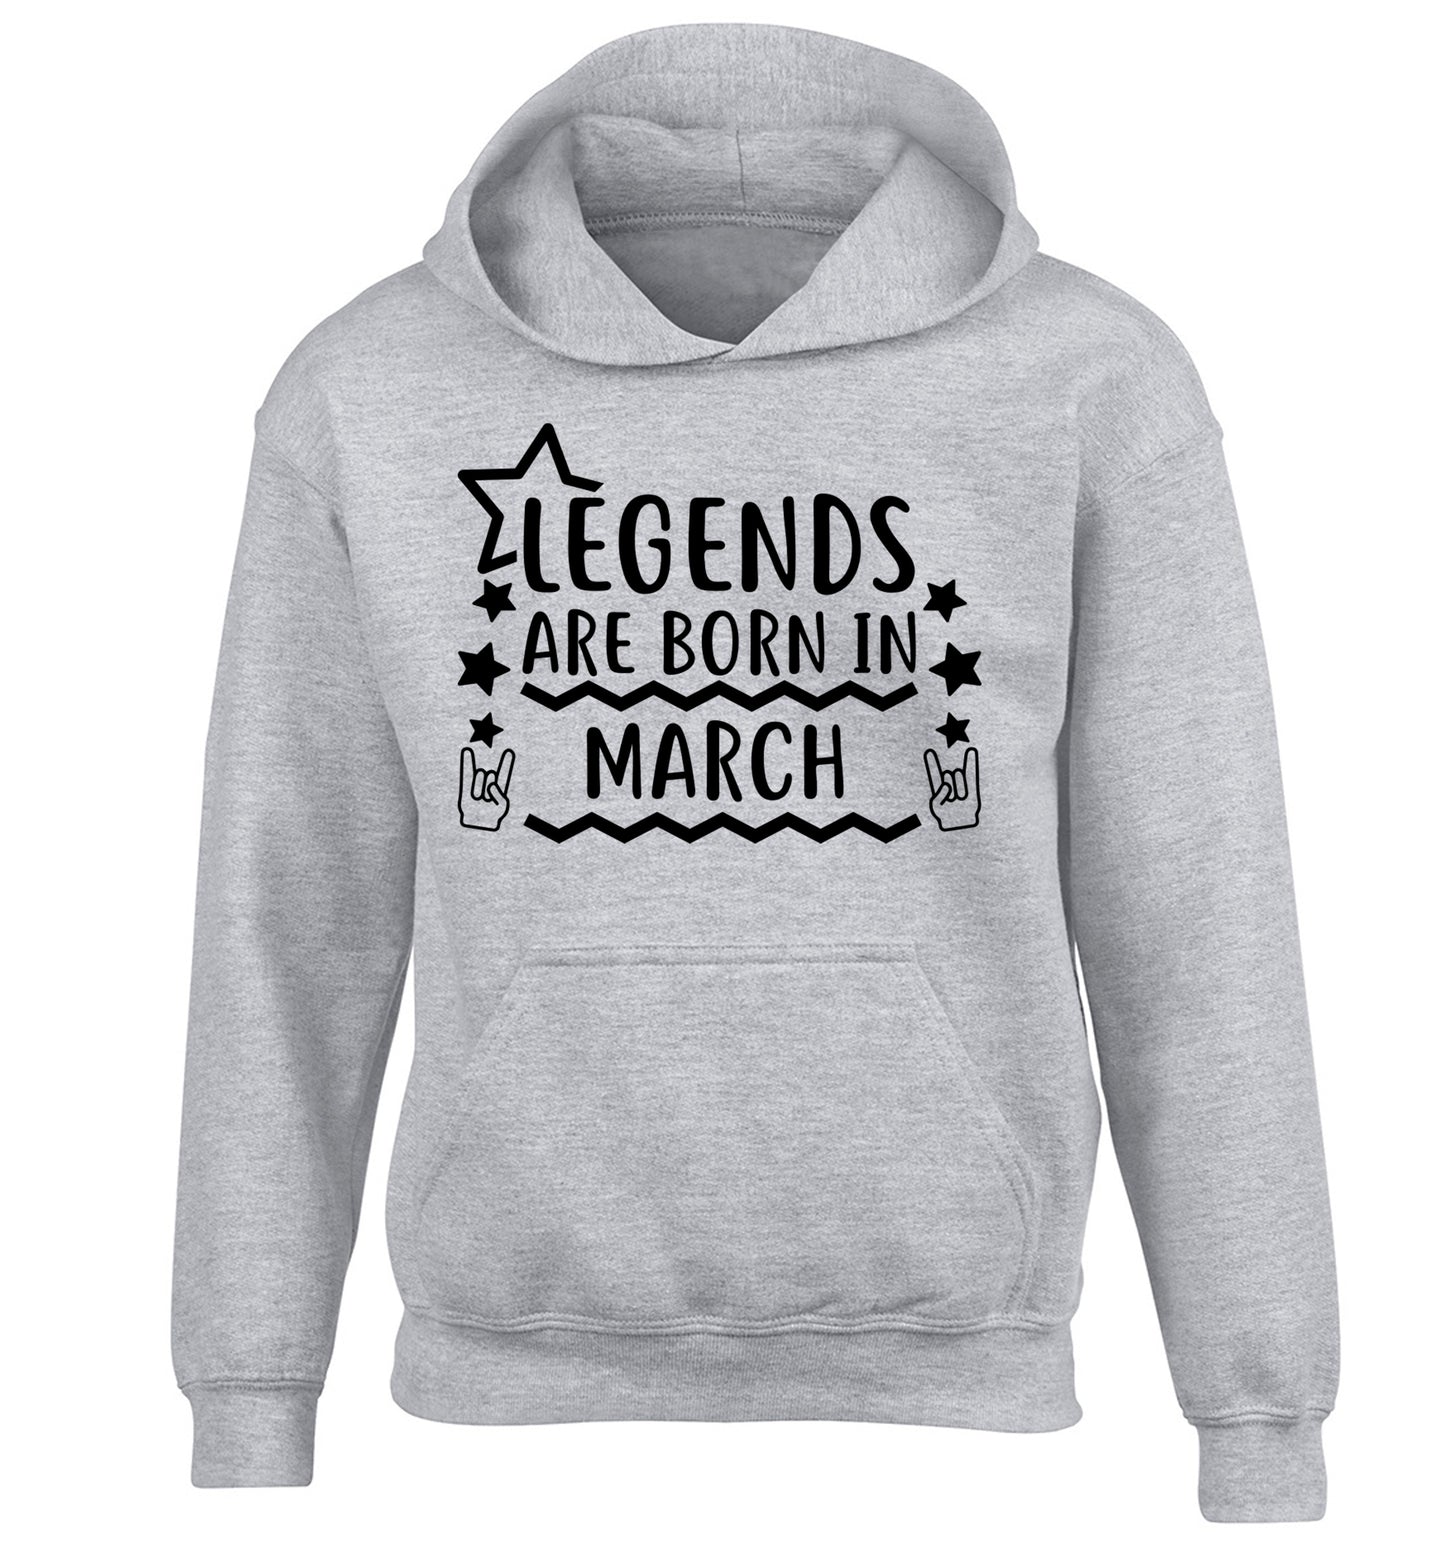 Legends are born in March children's grey hoodie 12-13 Years